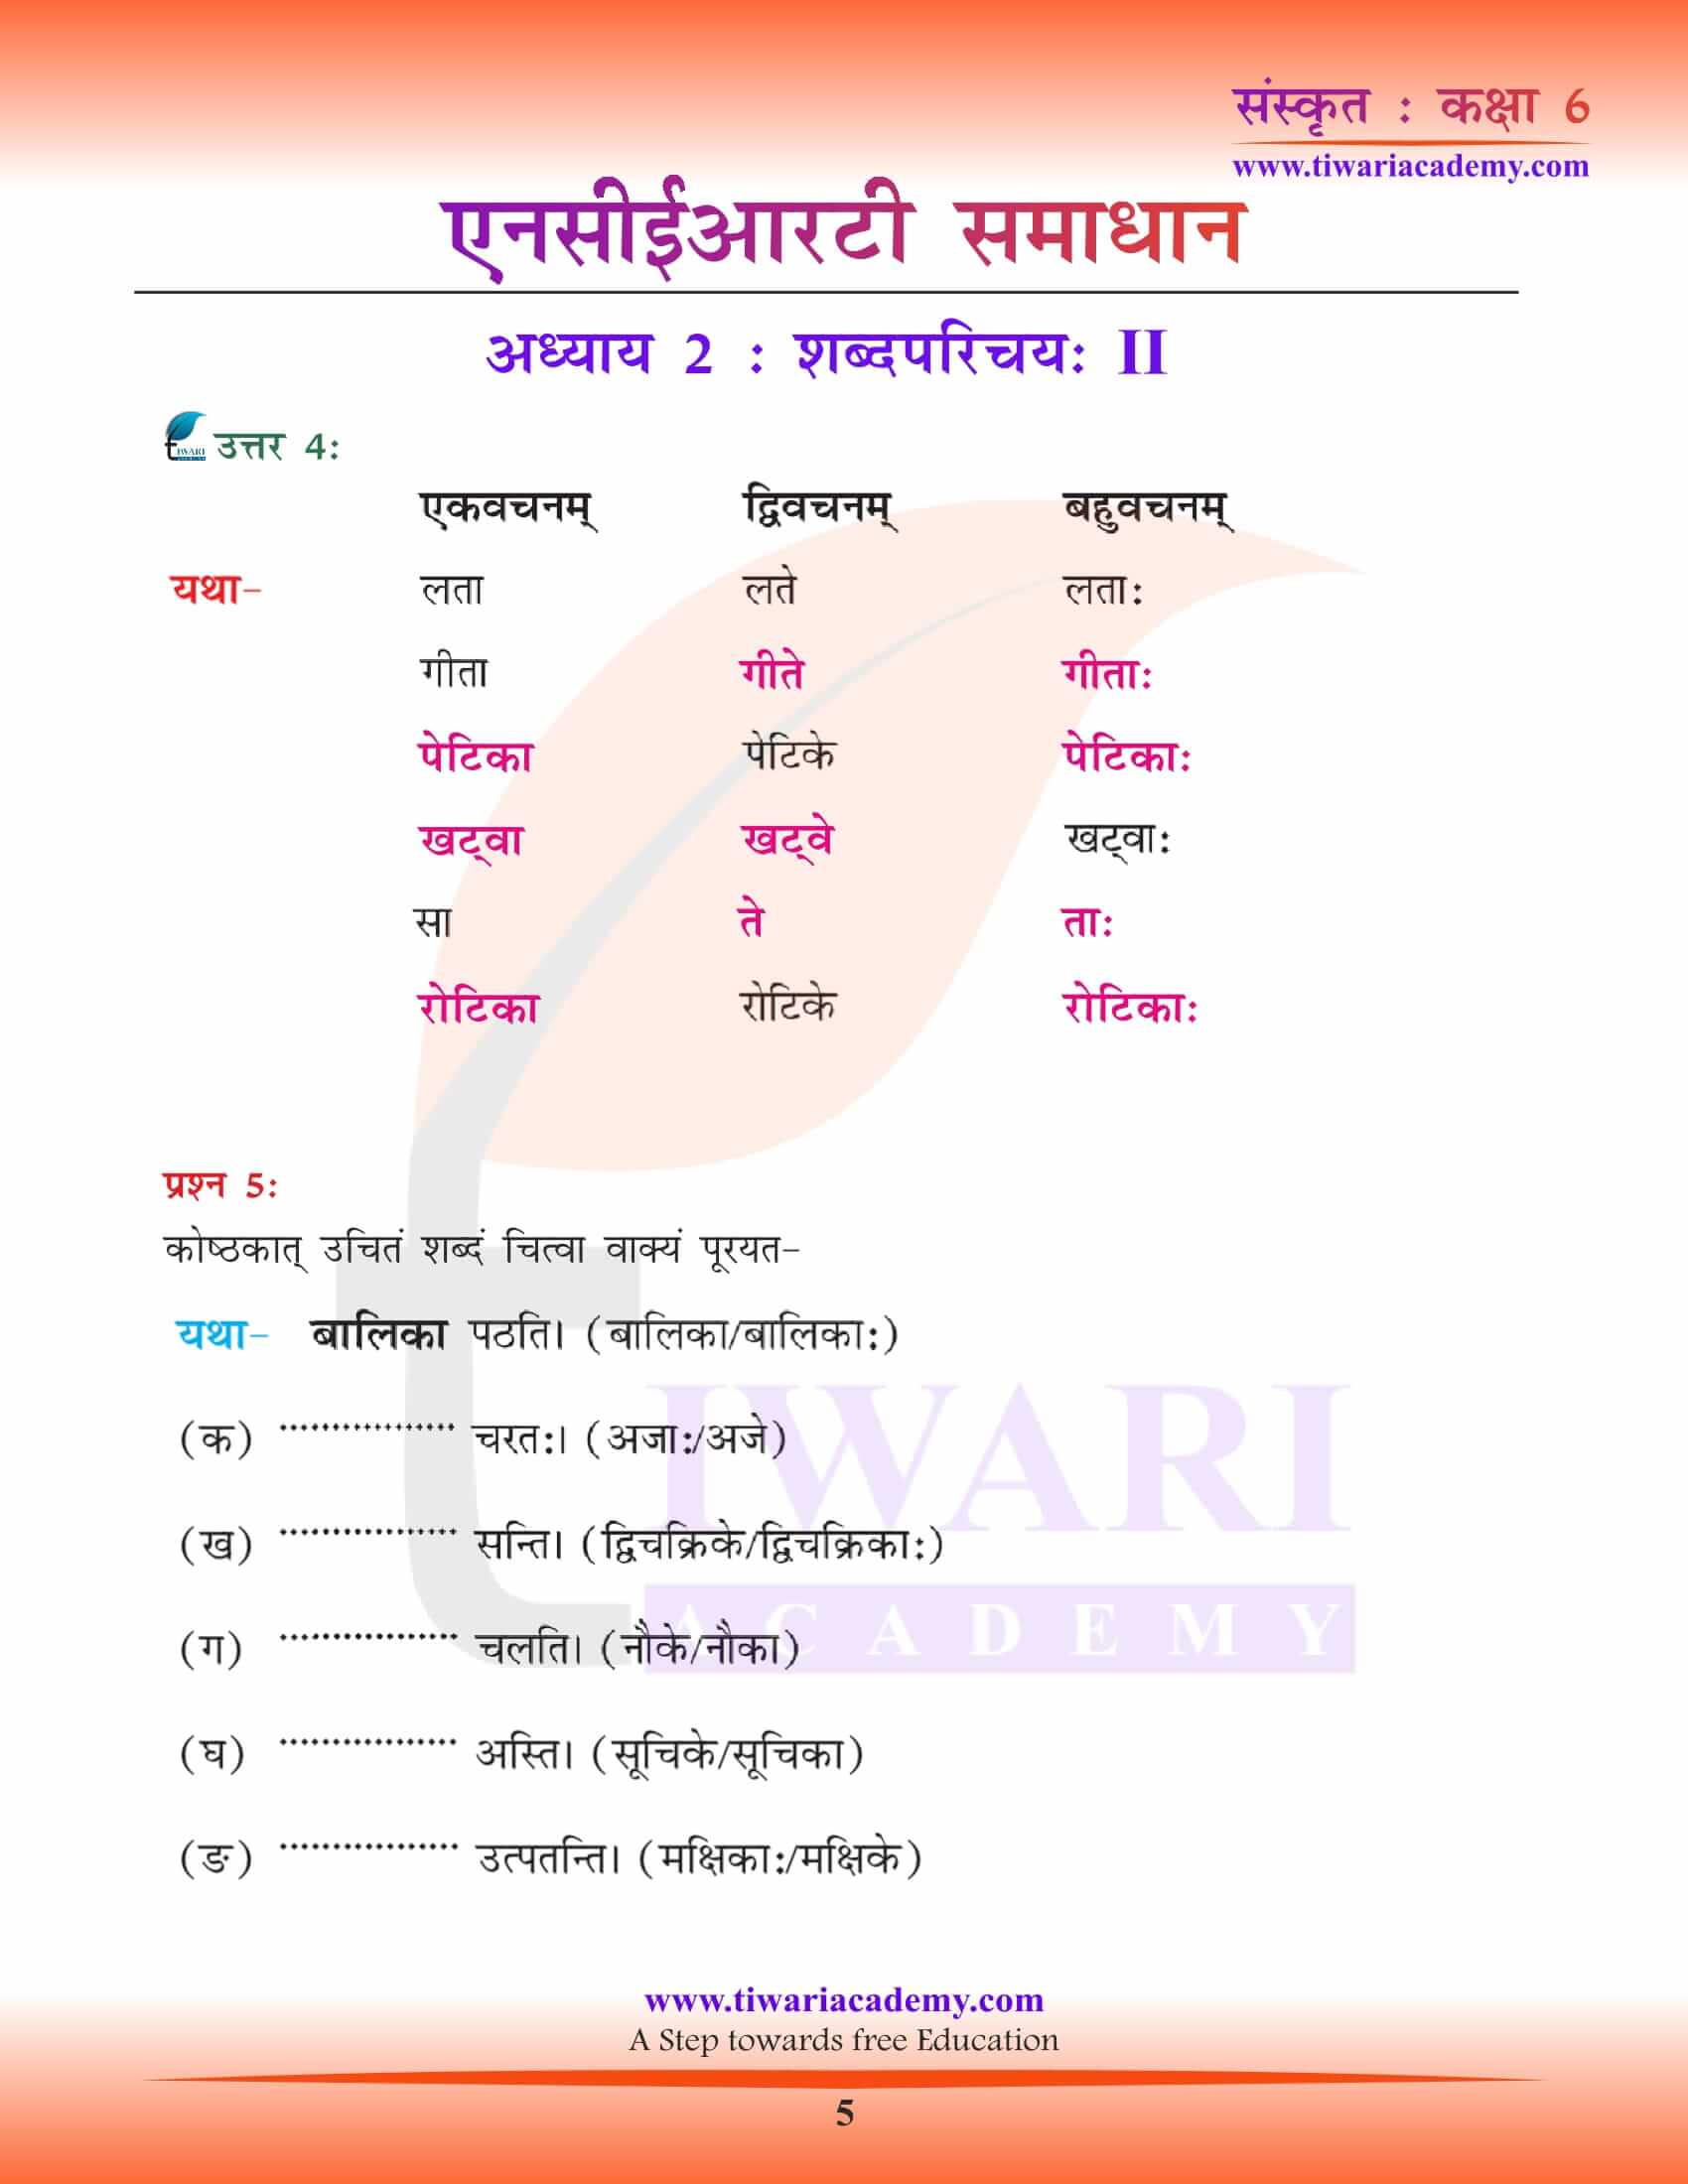 NCERT Solutions for Class 6 Sanskrit Chapter 2 answers